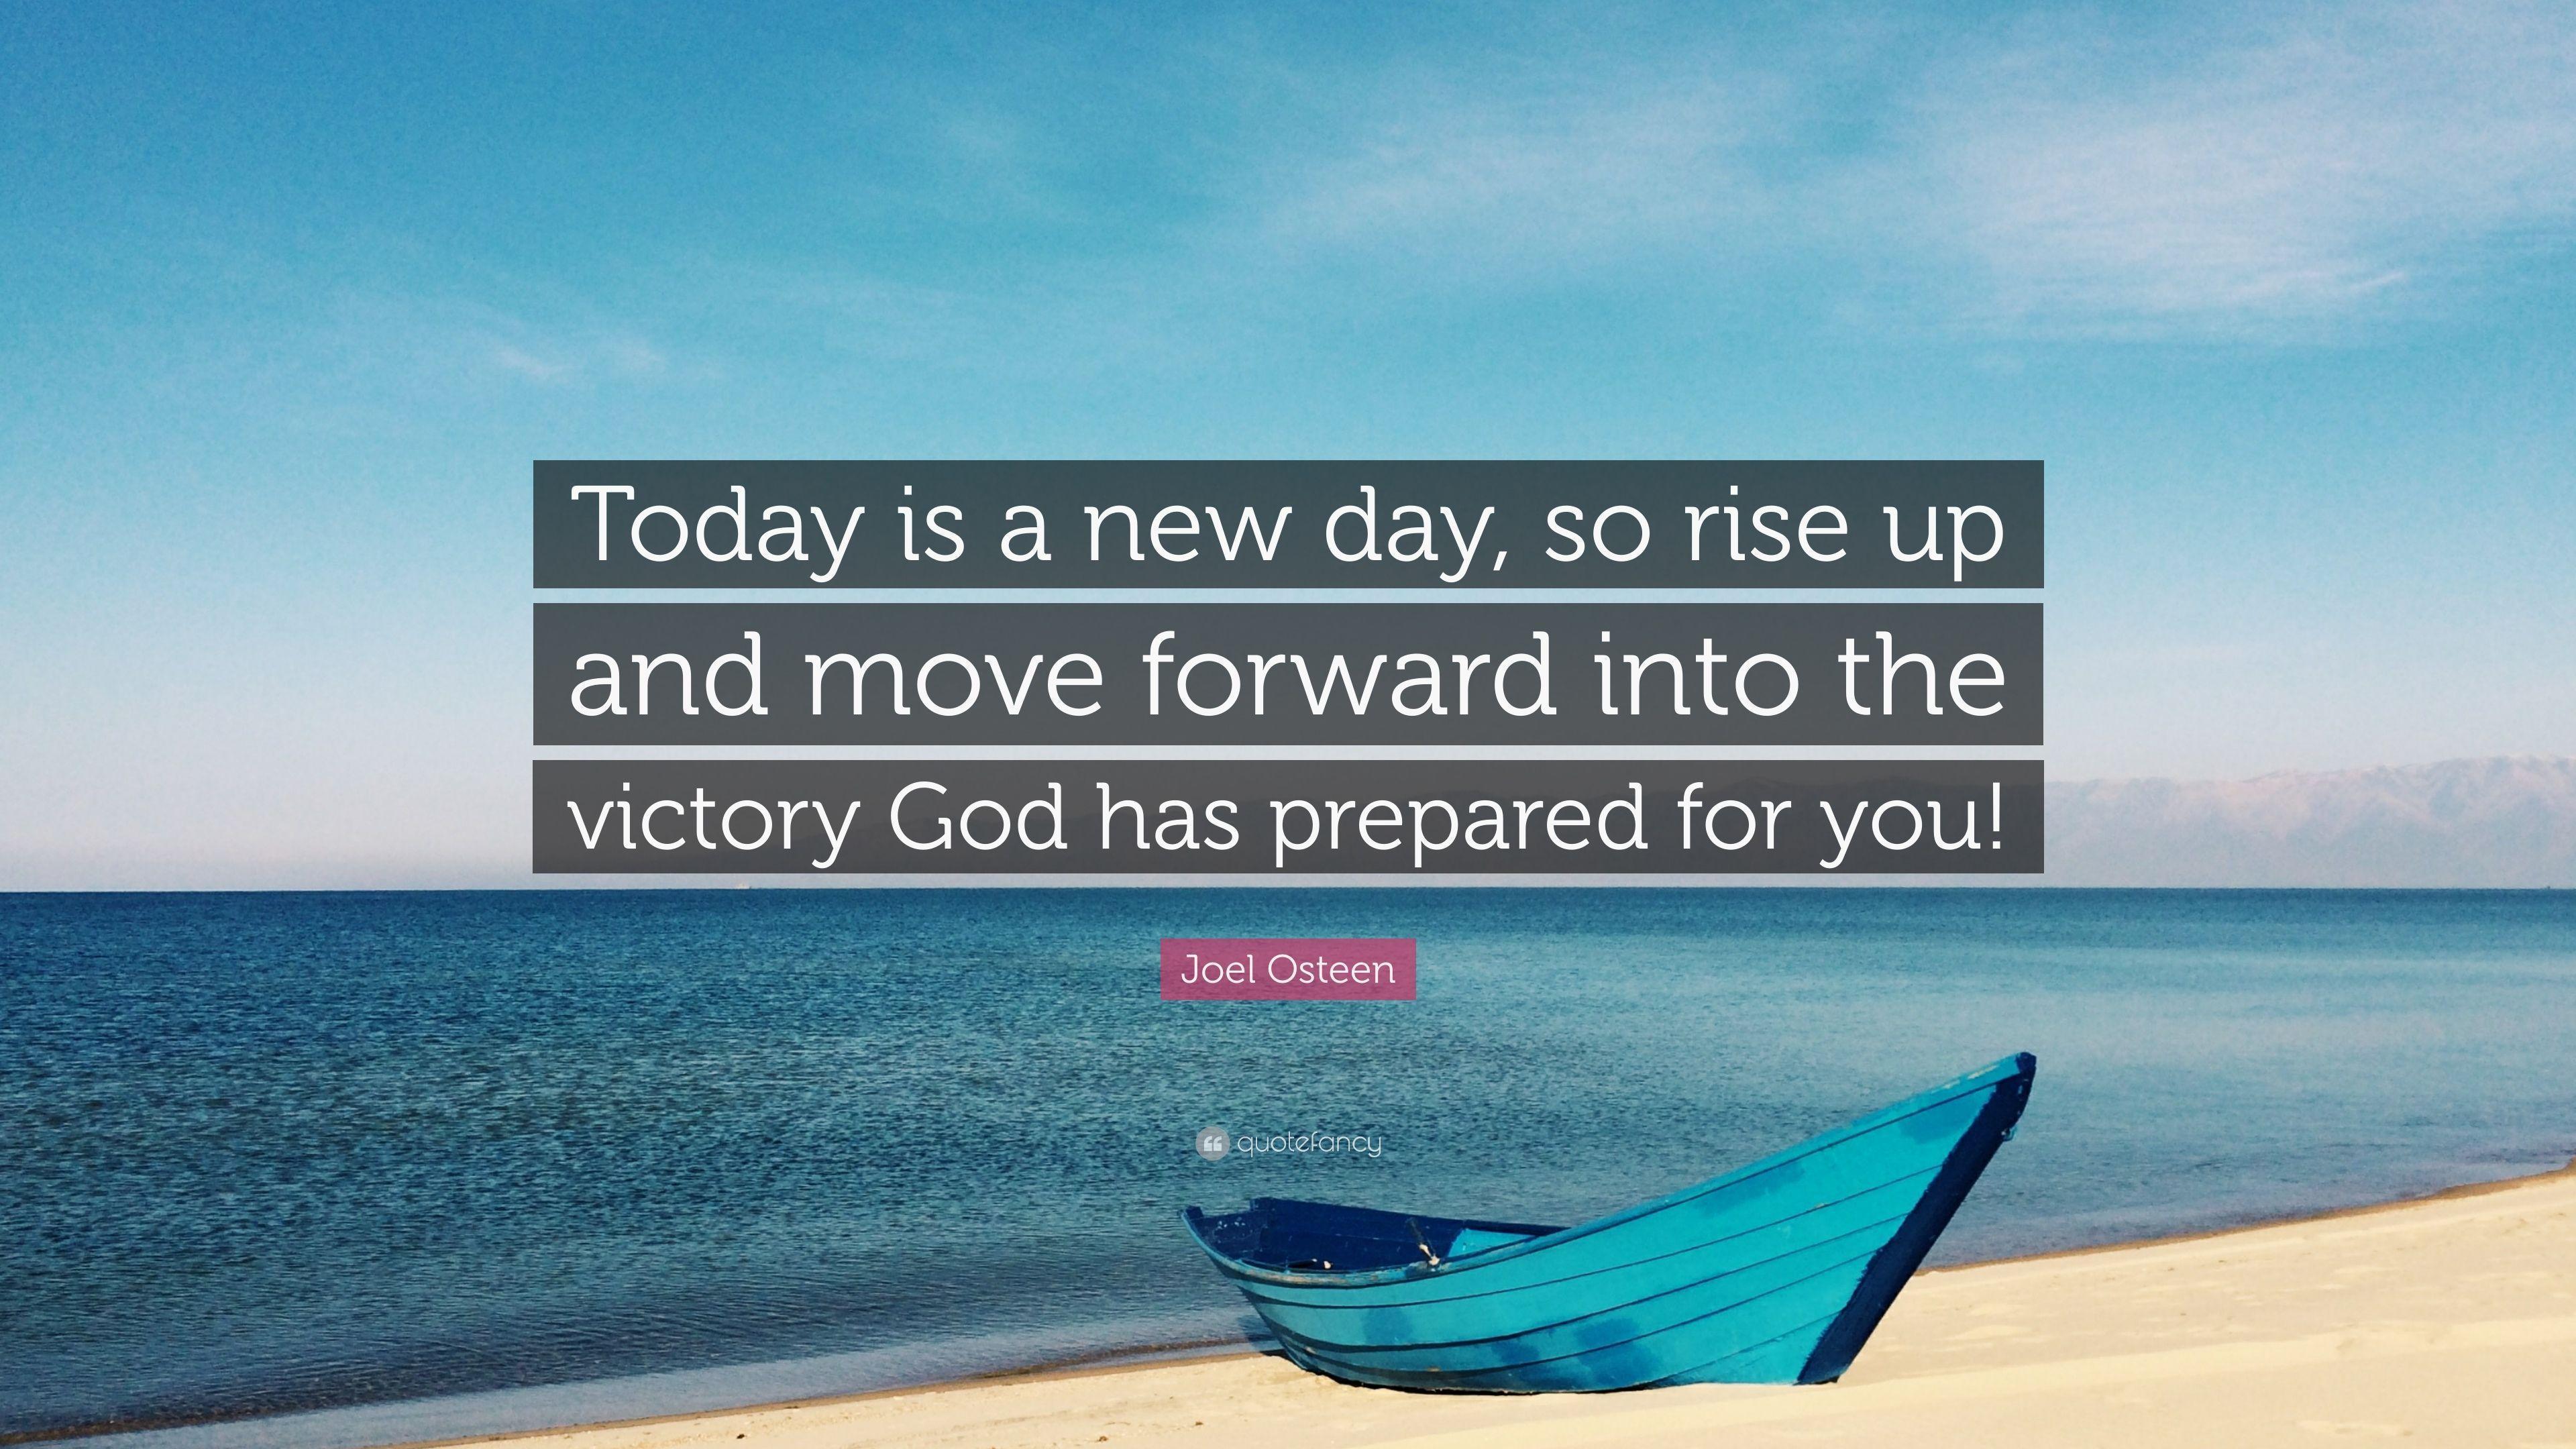 Joel Osteen Quote: “Today is a new day, so rise up and move